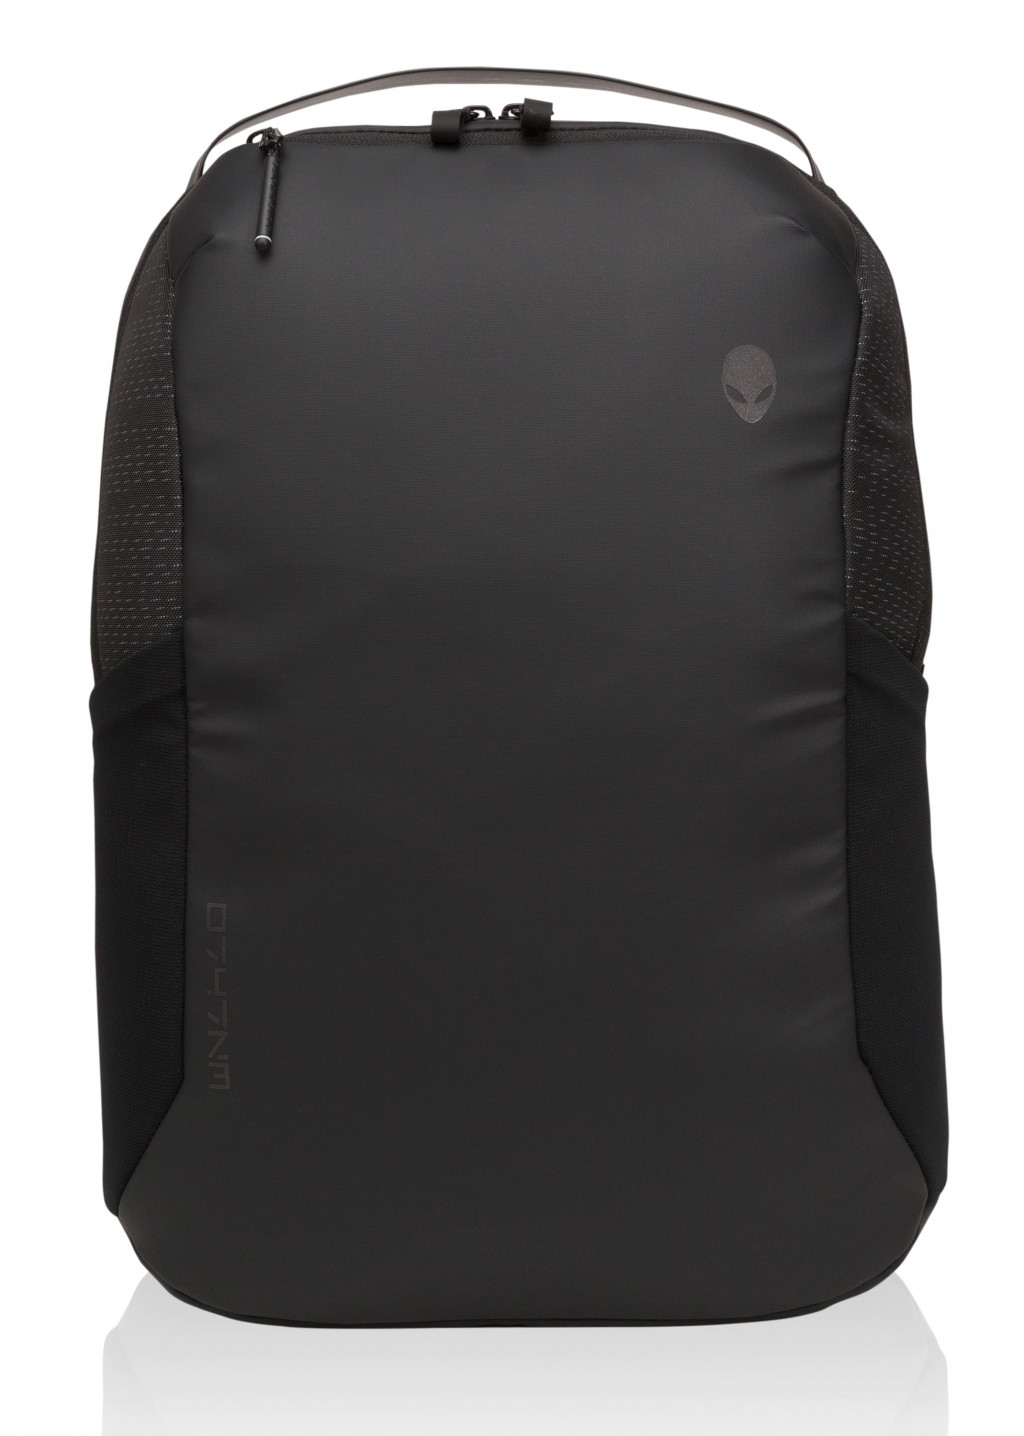 Dell Alienware Horizon Commuter Backpack AW423P Fits up to size 17 ", Black, Backpack